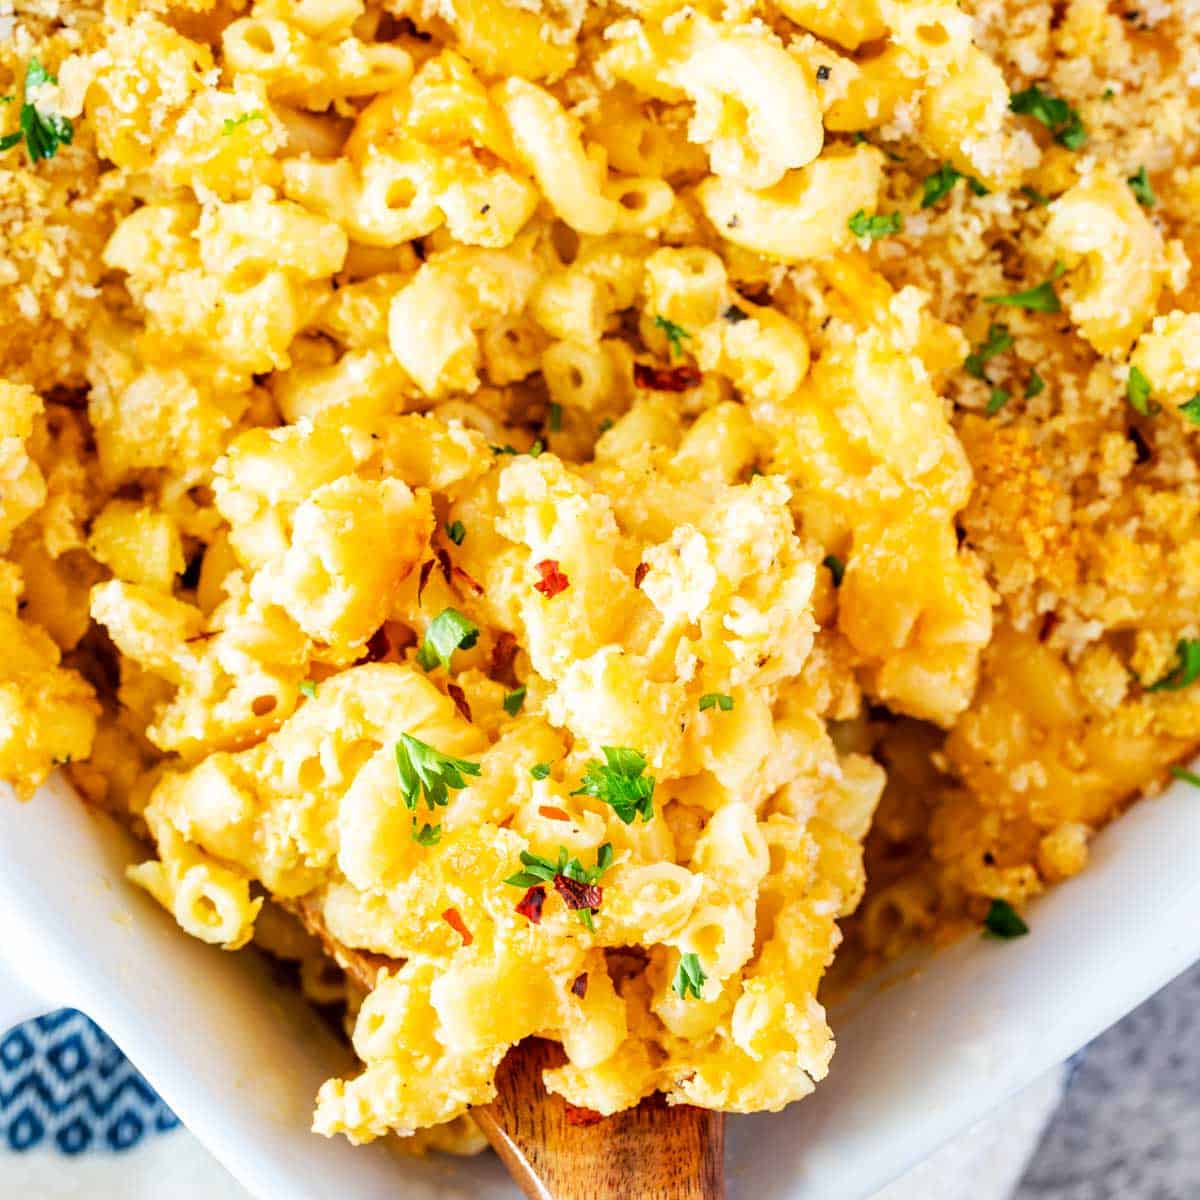 Close-up view of baked macaroni and cheese with breadcrumbs.